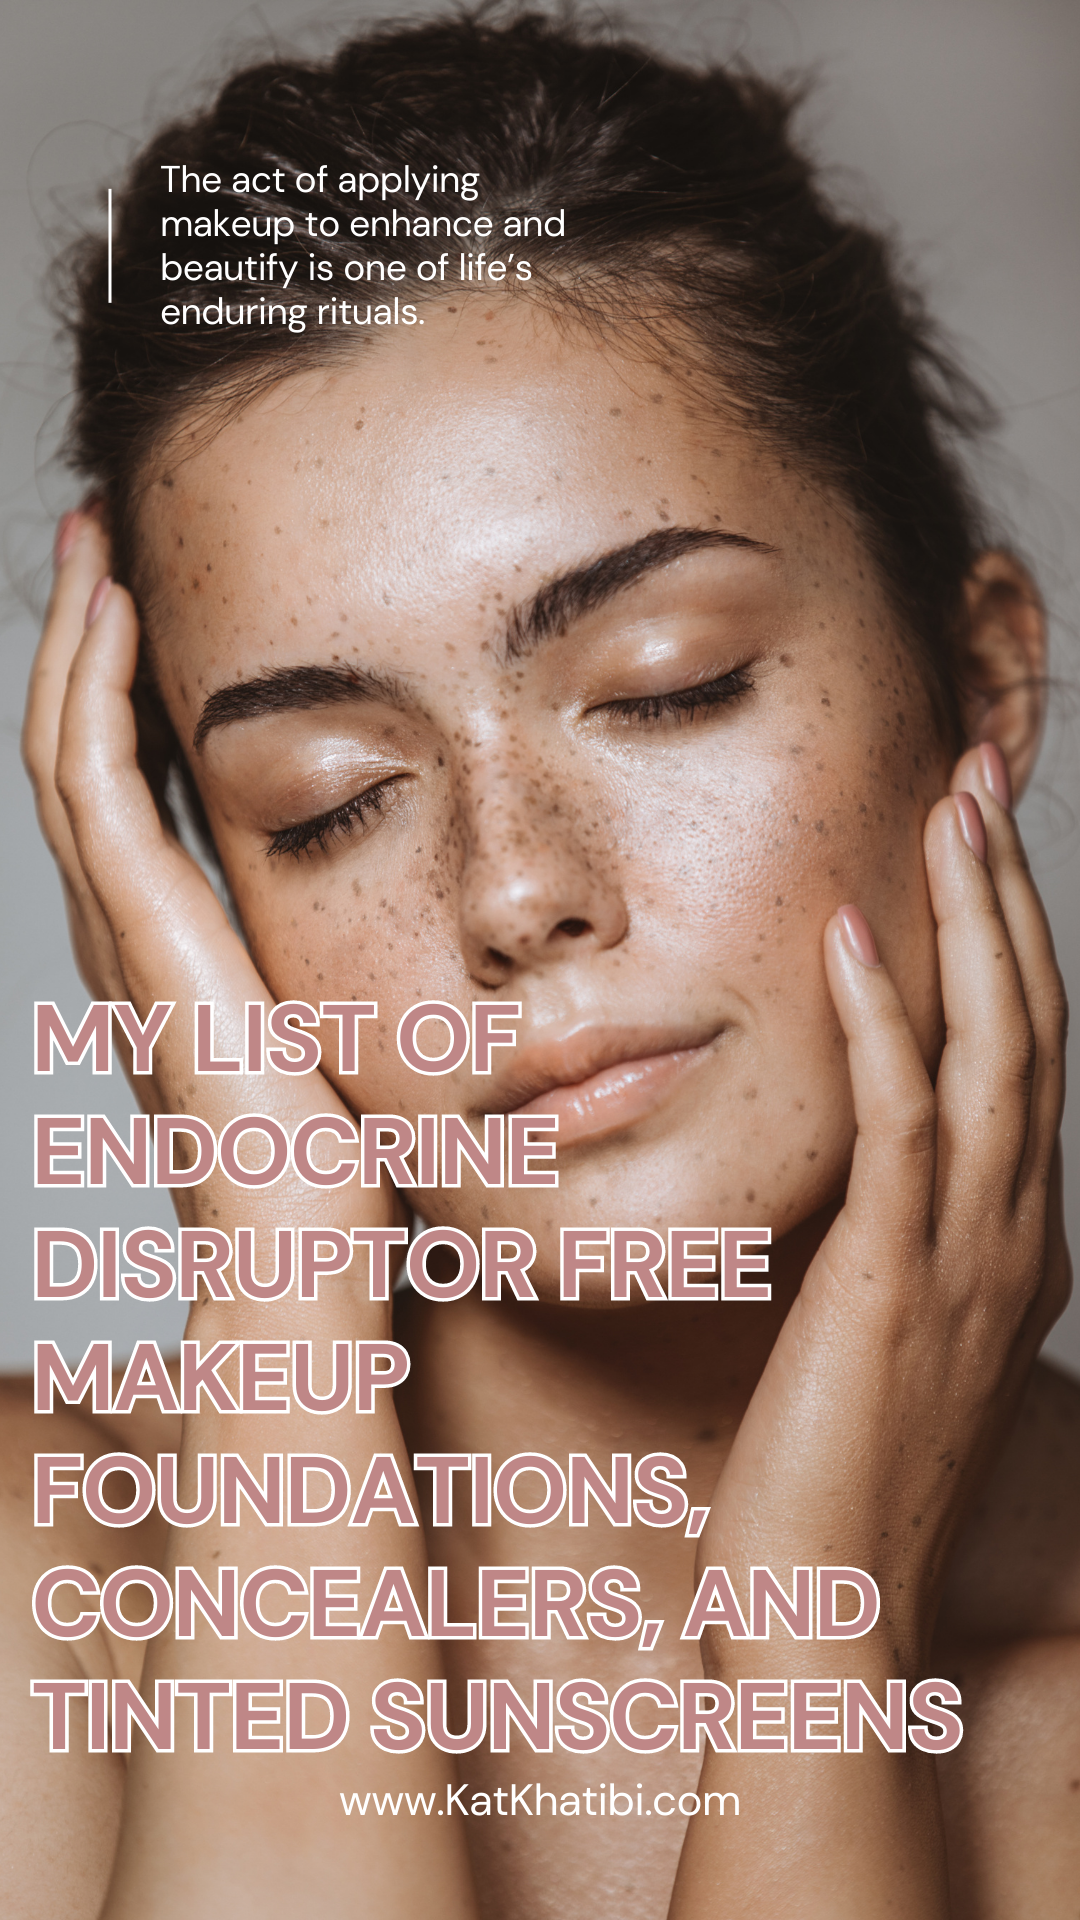 My list of Endocrine Disruptor Free Makeup Foundations, Concealers, and Tinted Sunscreens or Moisturizers